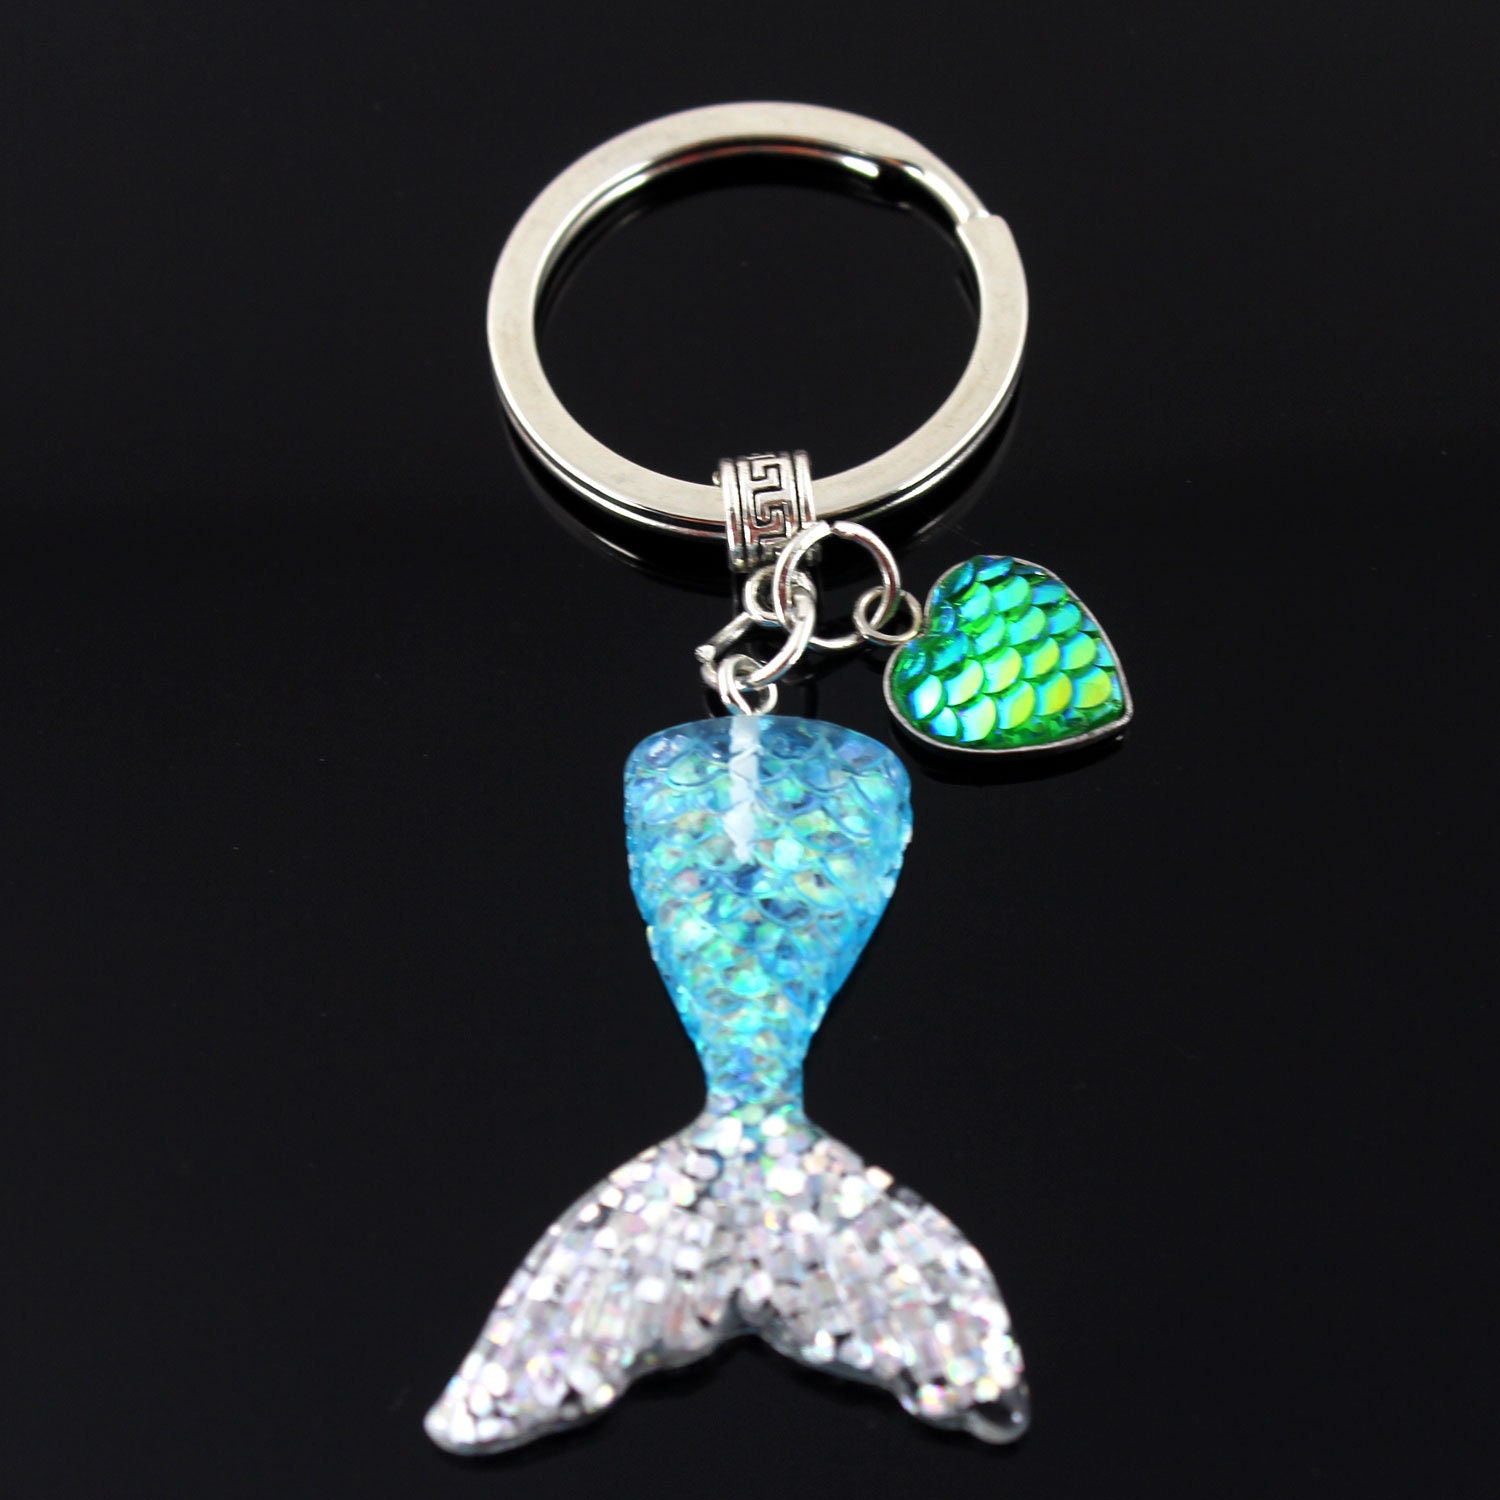 Mermaid Party Favors, Mermaid Favor, Gifts, Gift, Tail, Heart-Shaped Scales